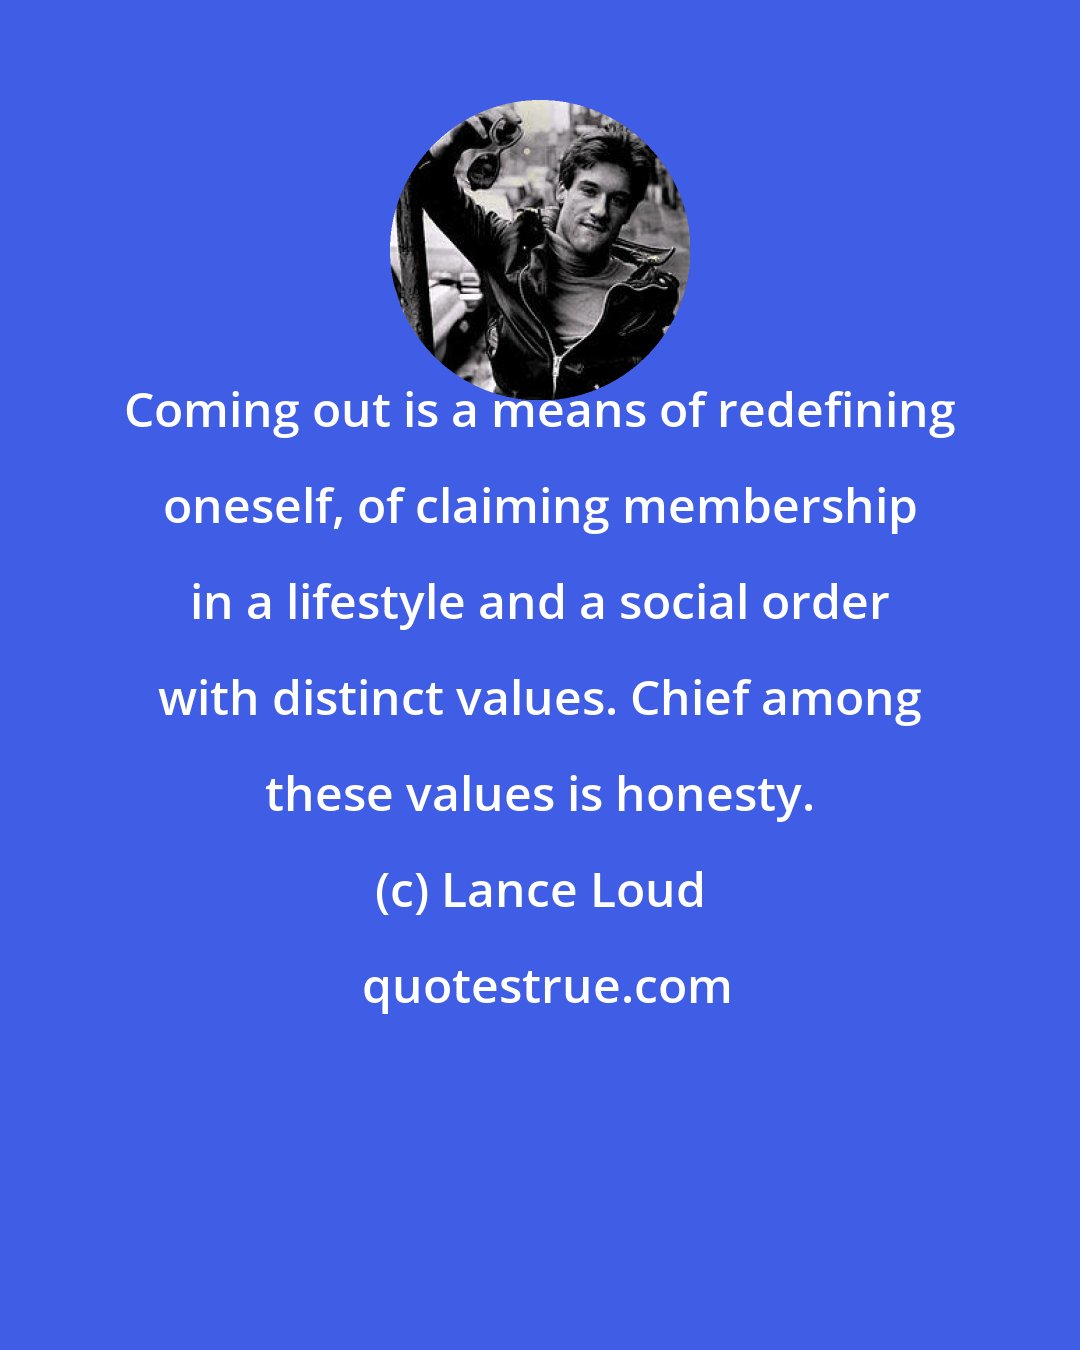 Lance Loud: Coming out is a means of redefining oneself, of claiming membership in a lifestyle and a social order with distinct values. Chief among these values is honesty.